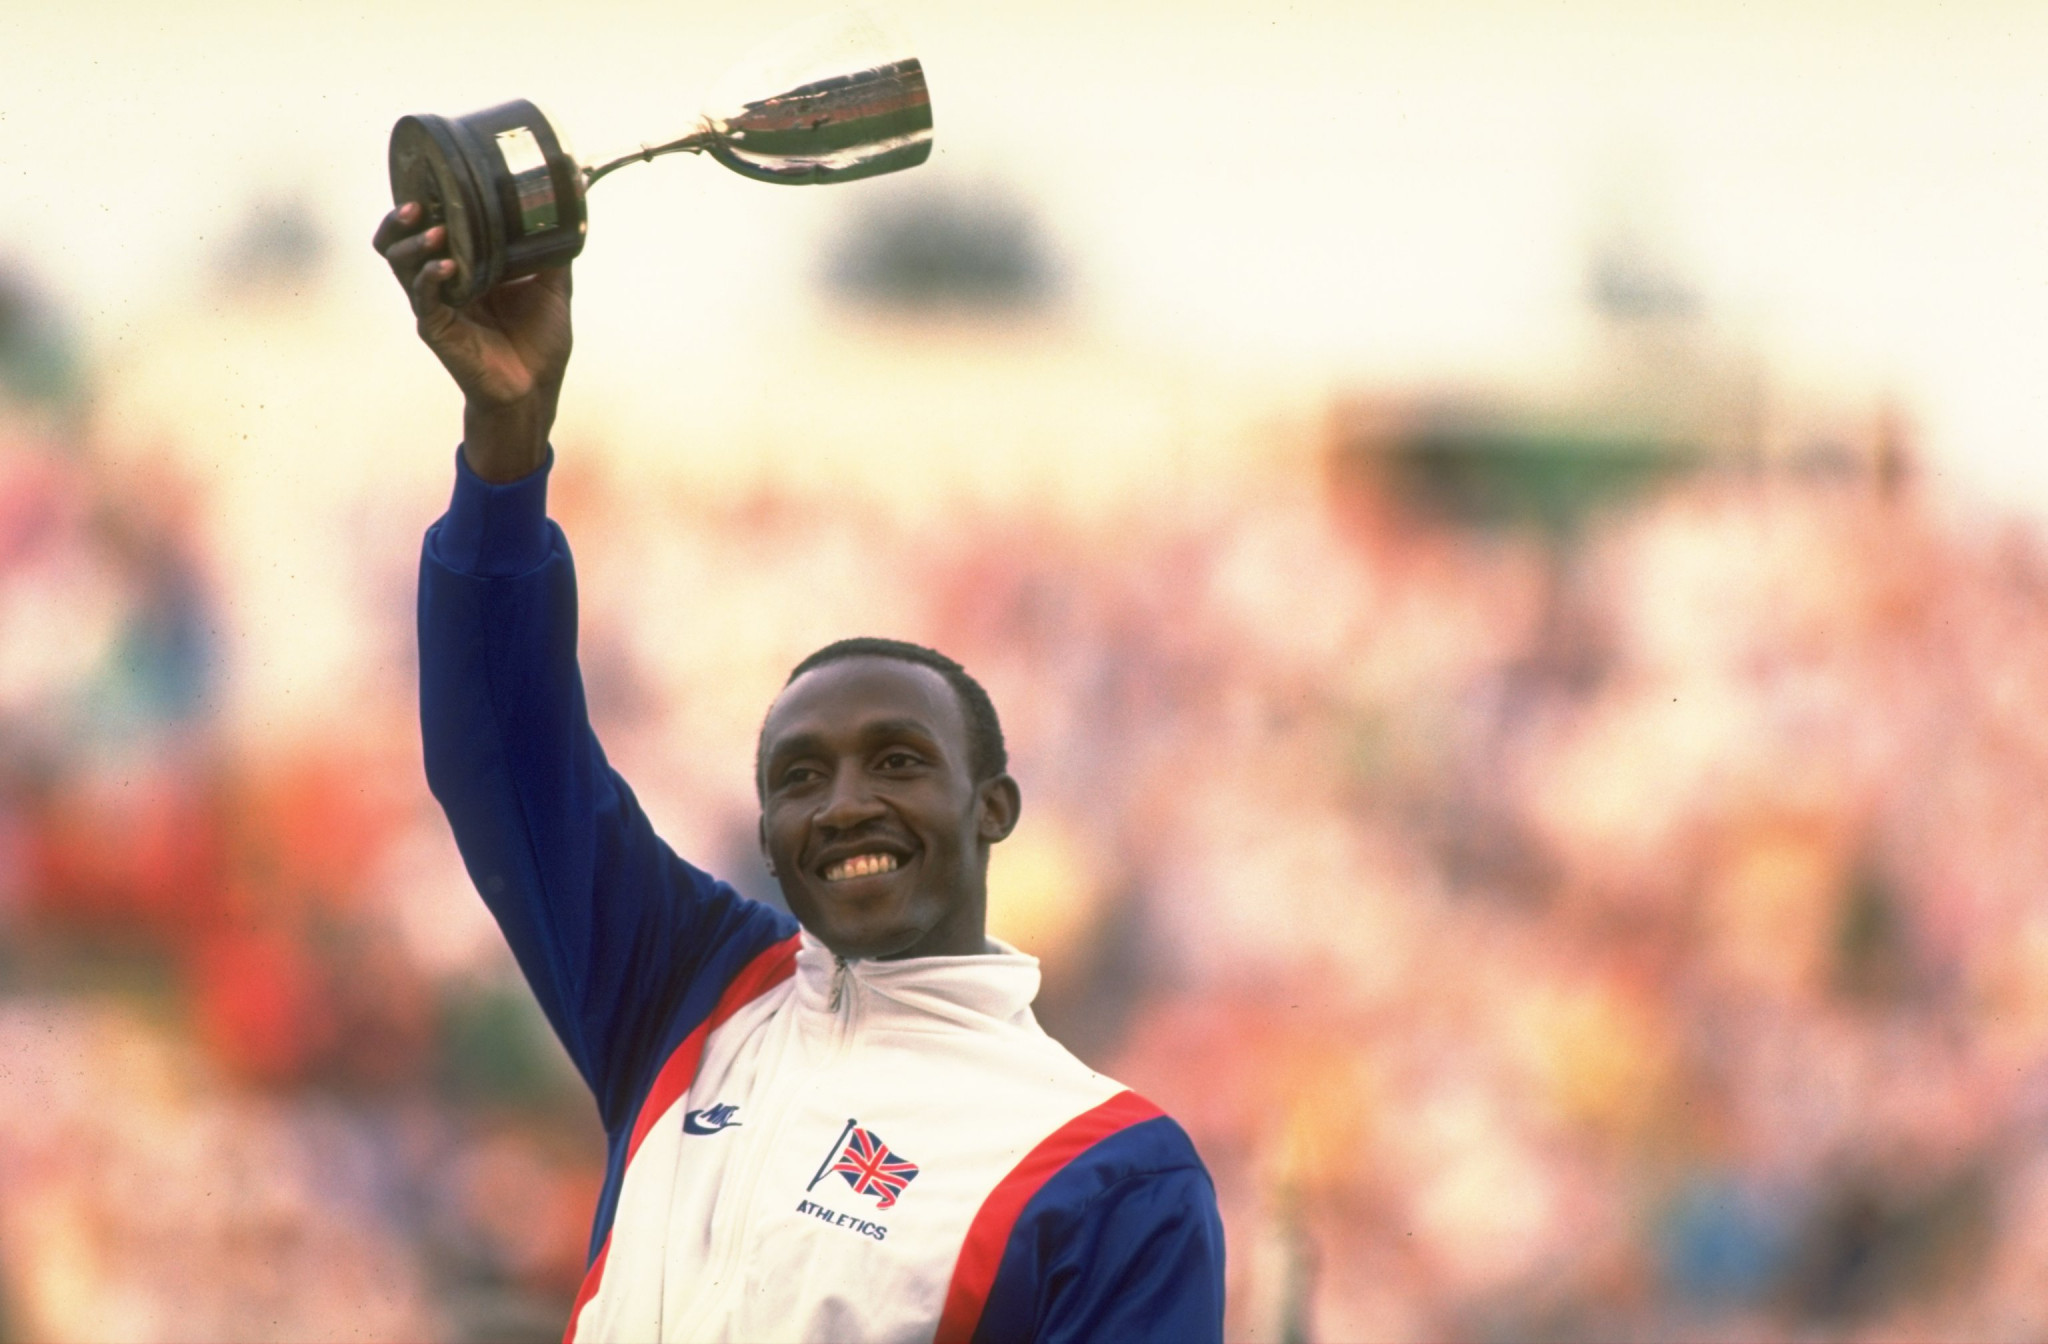 Winning the European Cup for the first time in 1989 on the home ground of Gateshead was a very big deal for British athletics, whose team was led by Linford Christie ©Getty Images